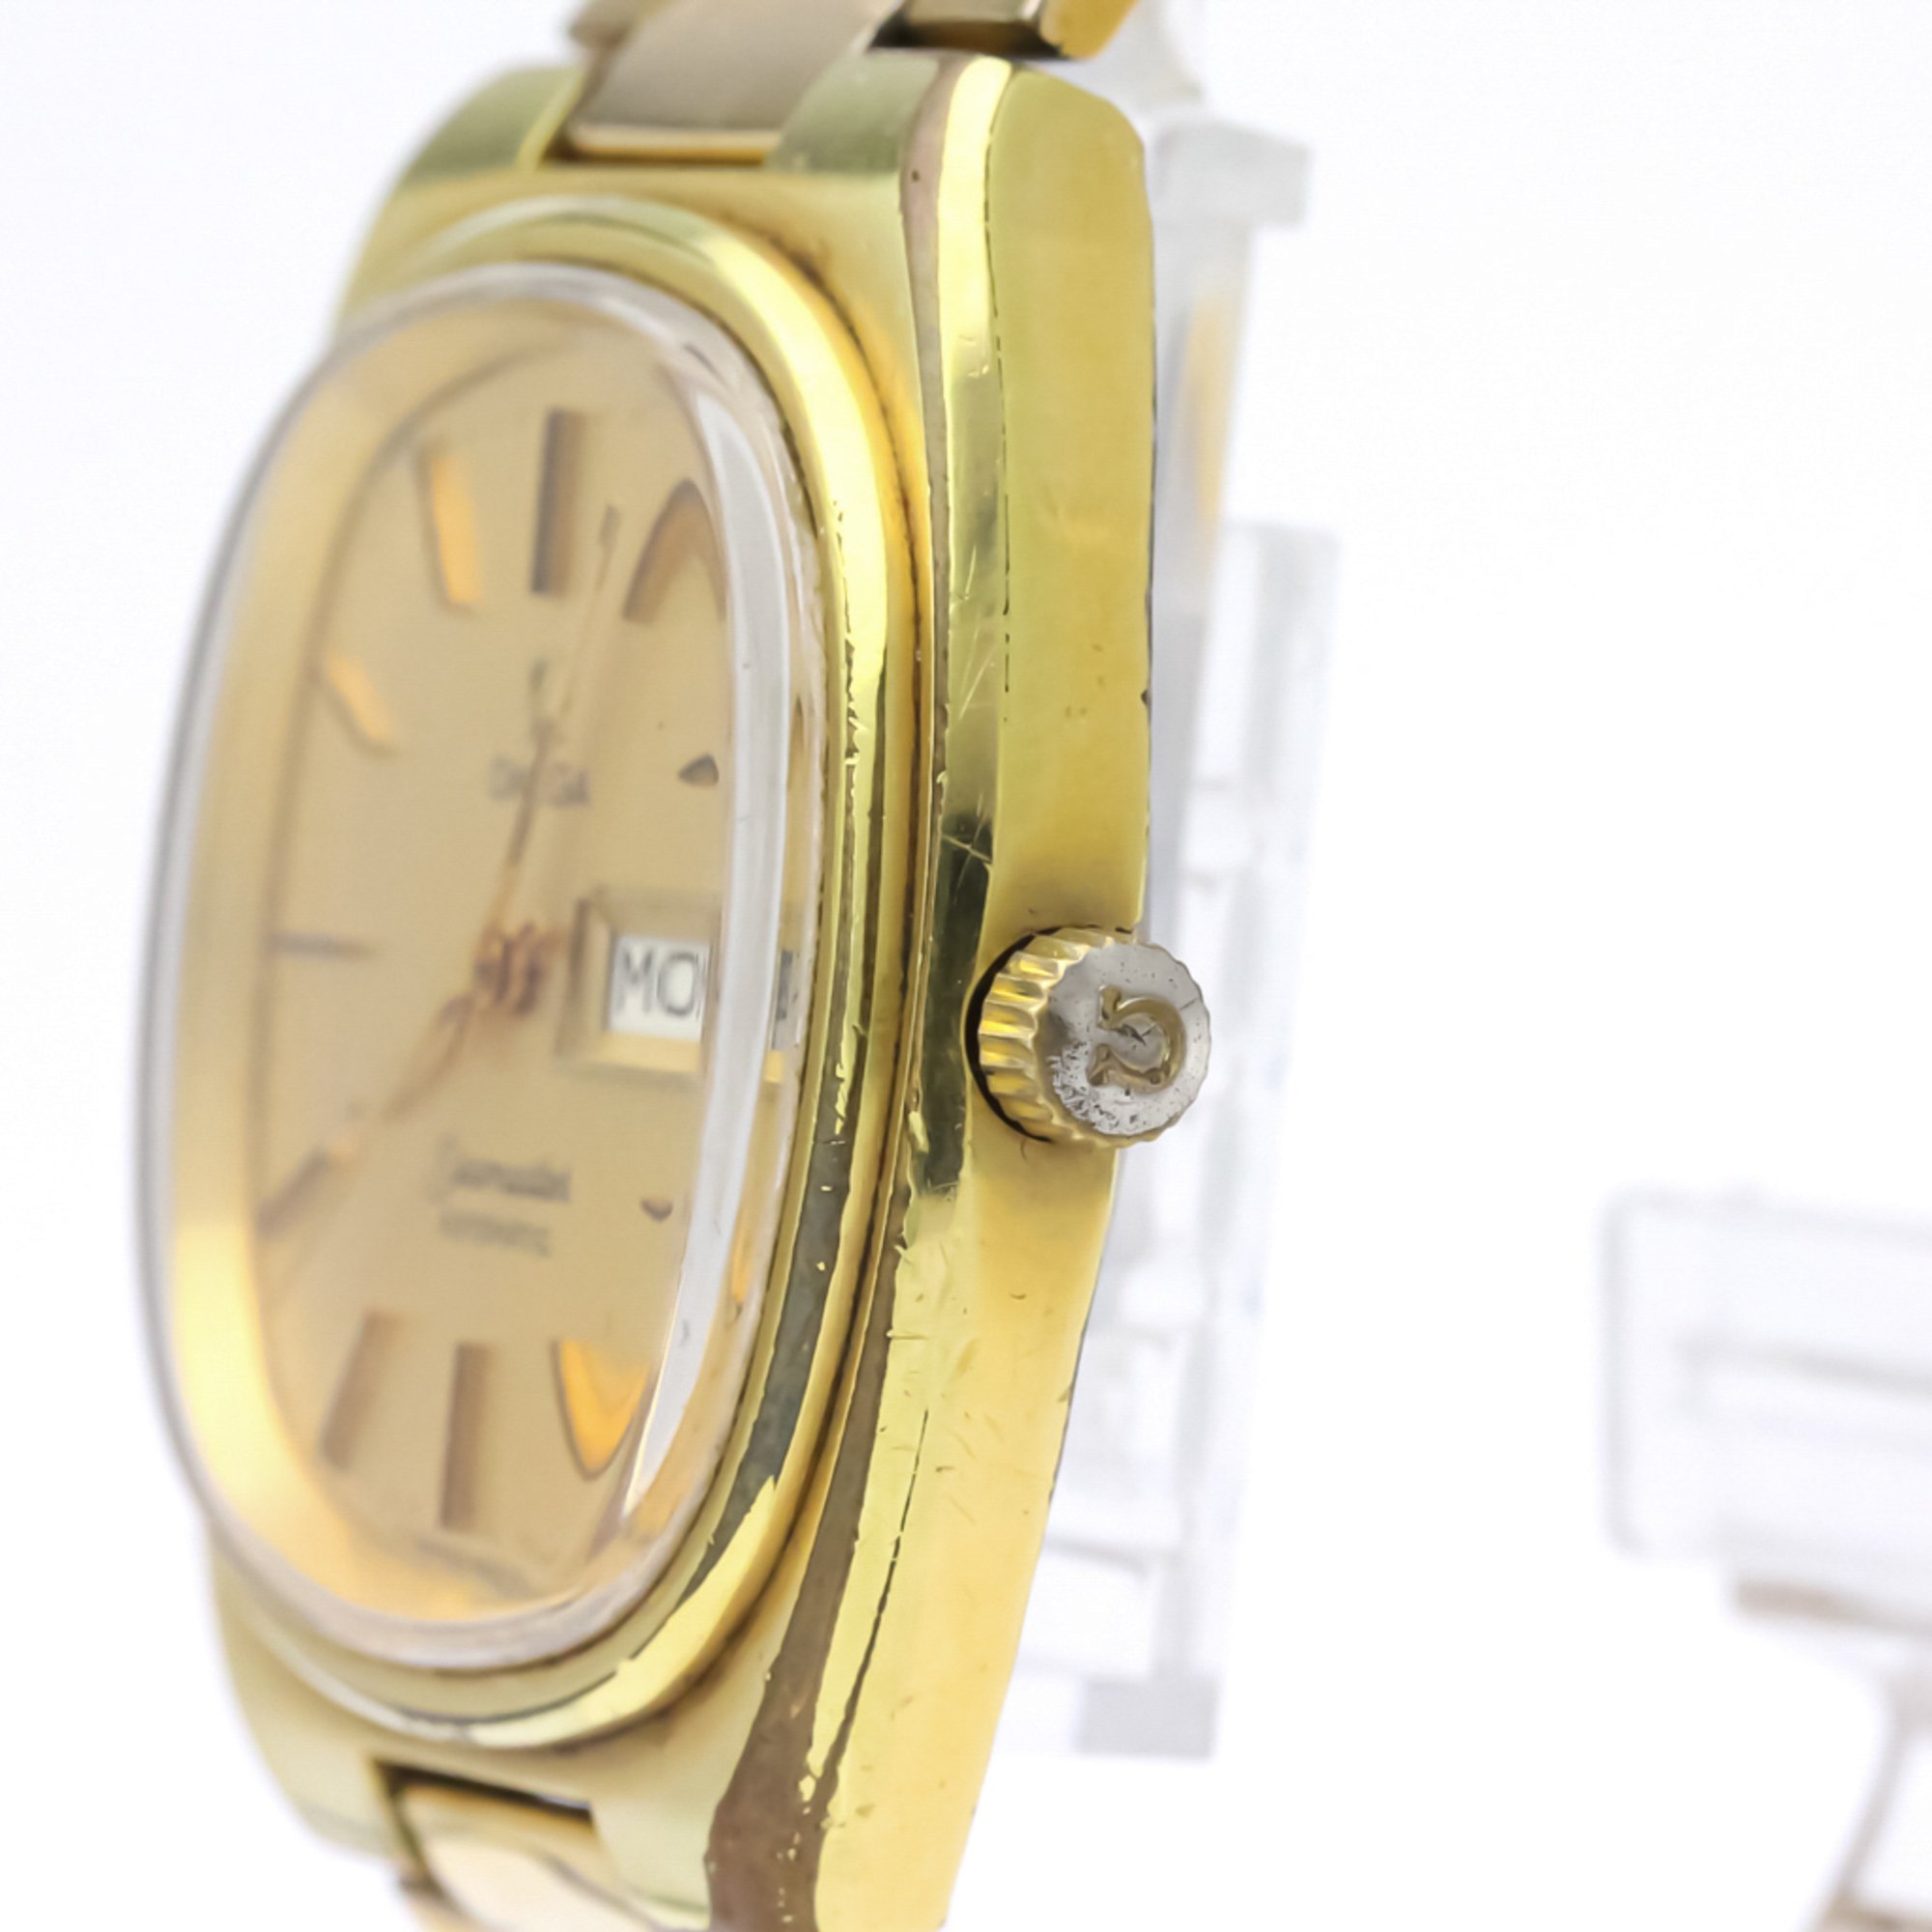 Omega Seamaster Automatic Gold Plated Men's Dress Watch 166.0213